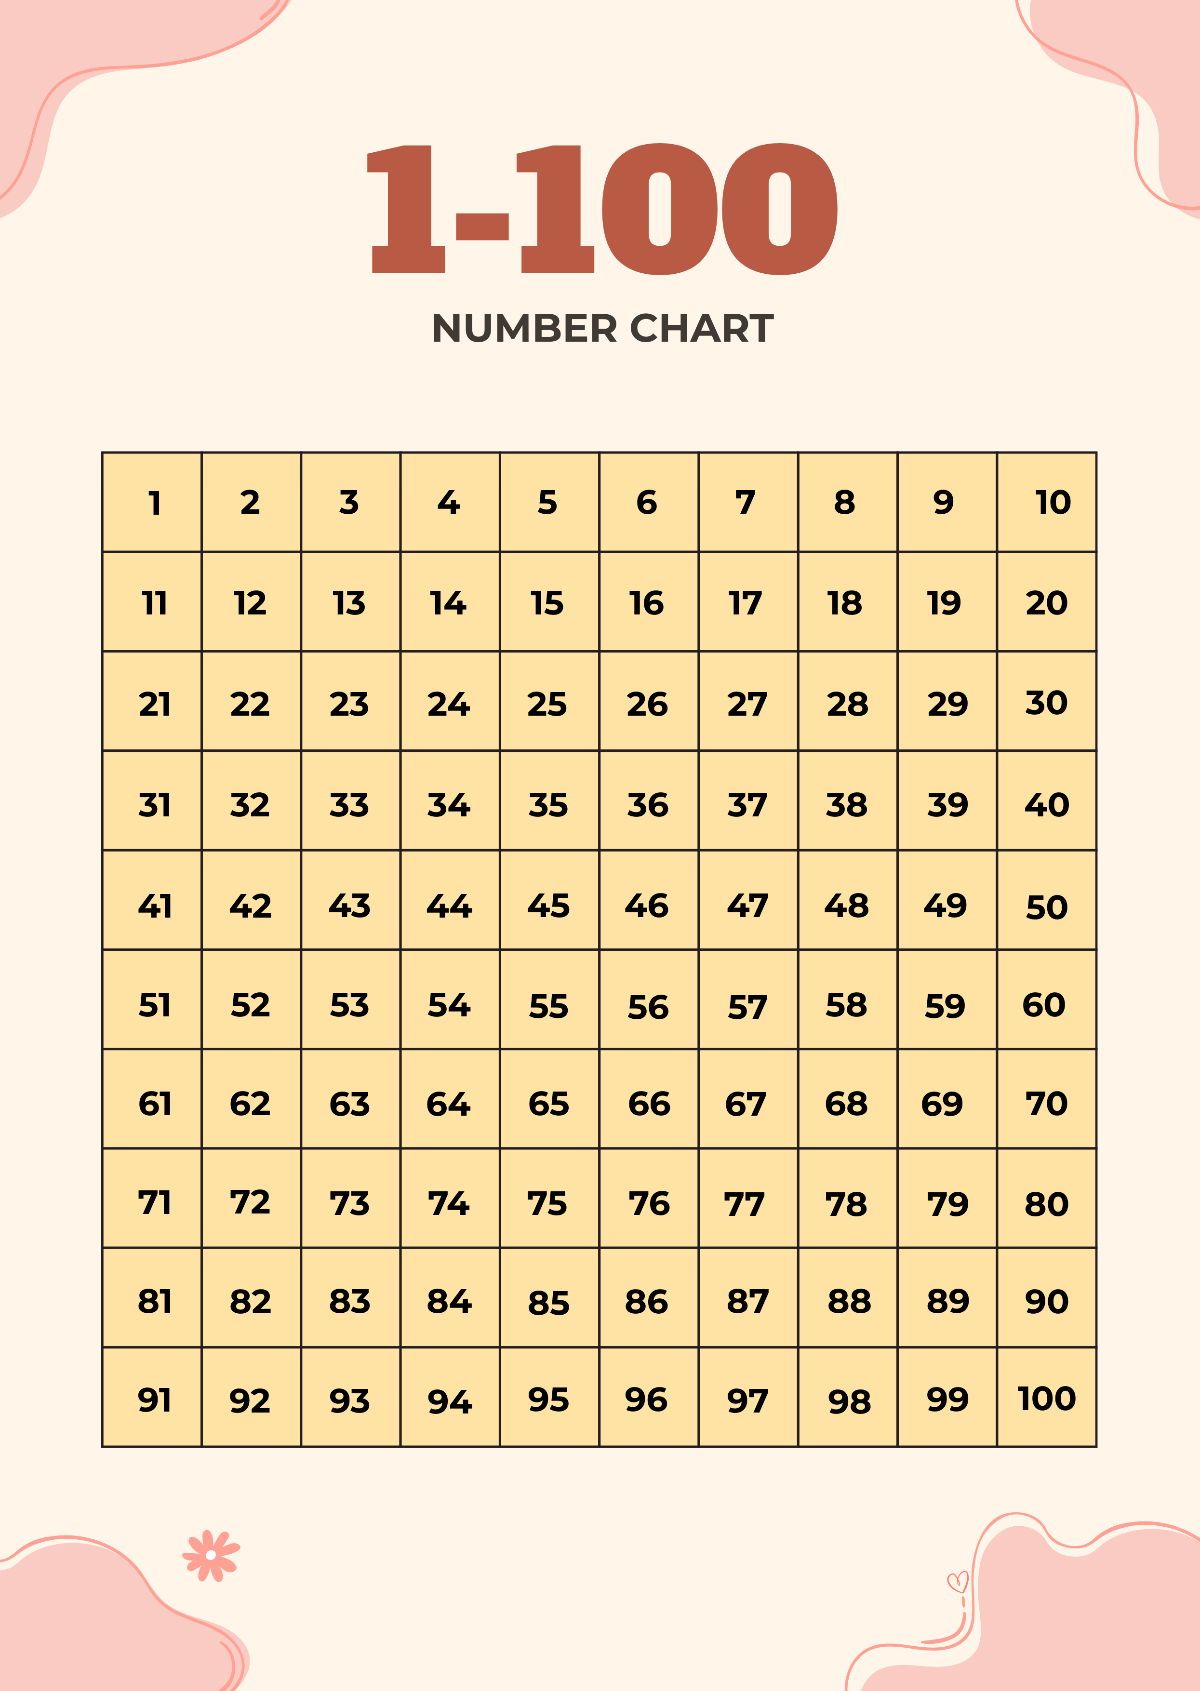 1 - 100 Number Chart